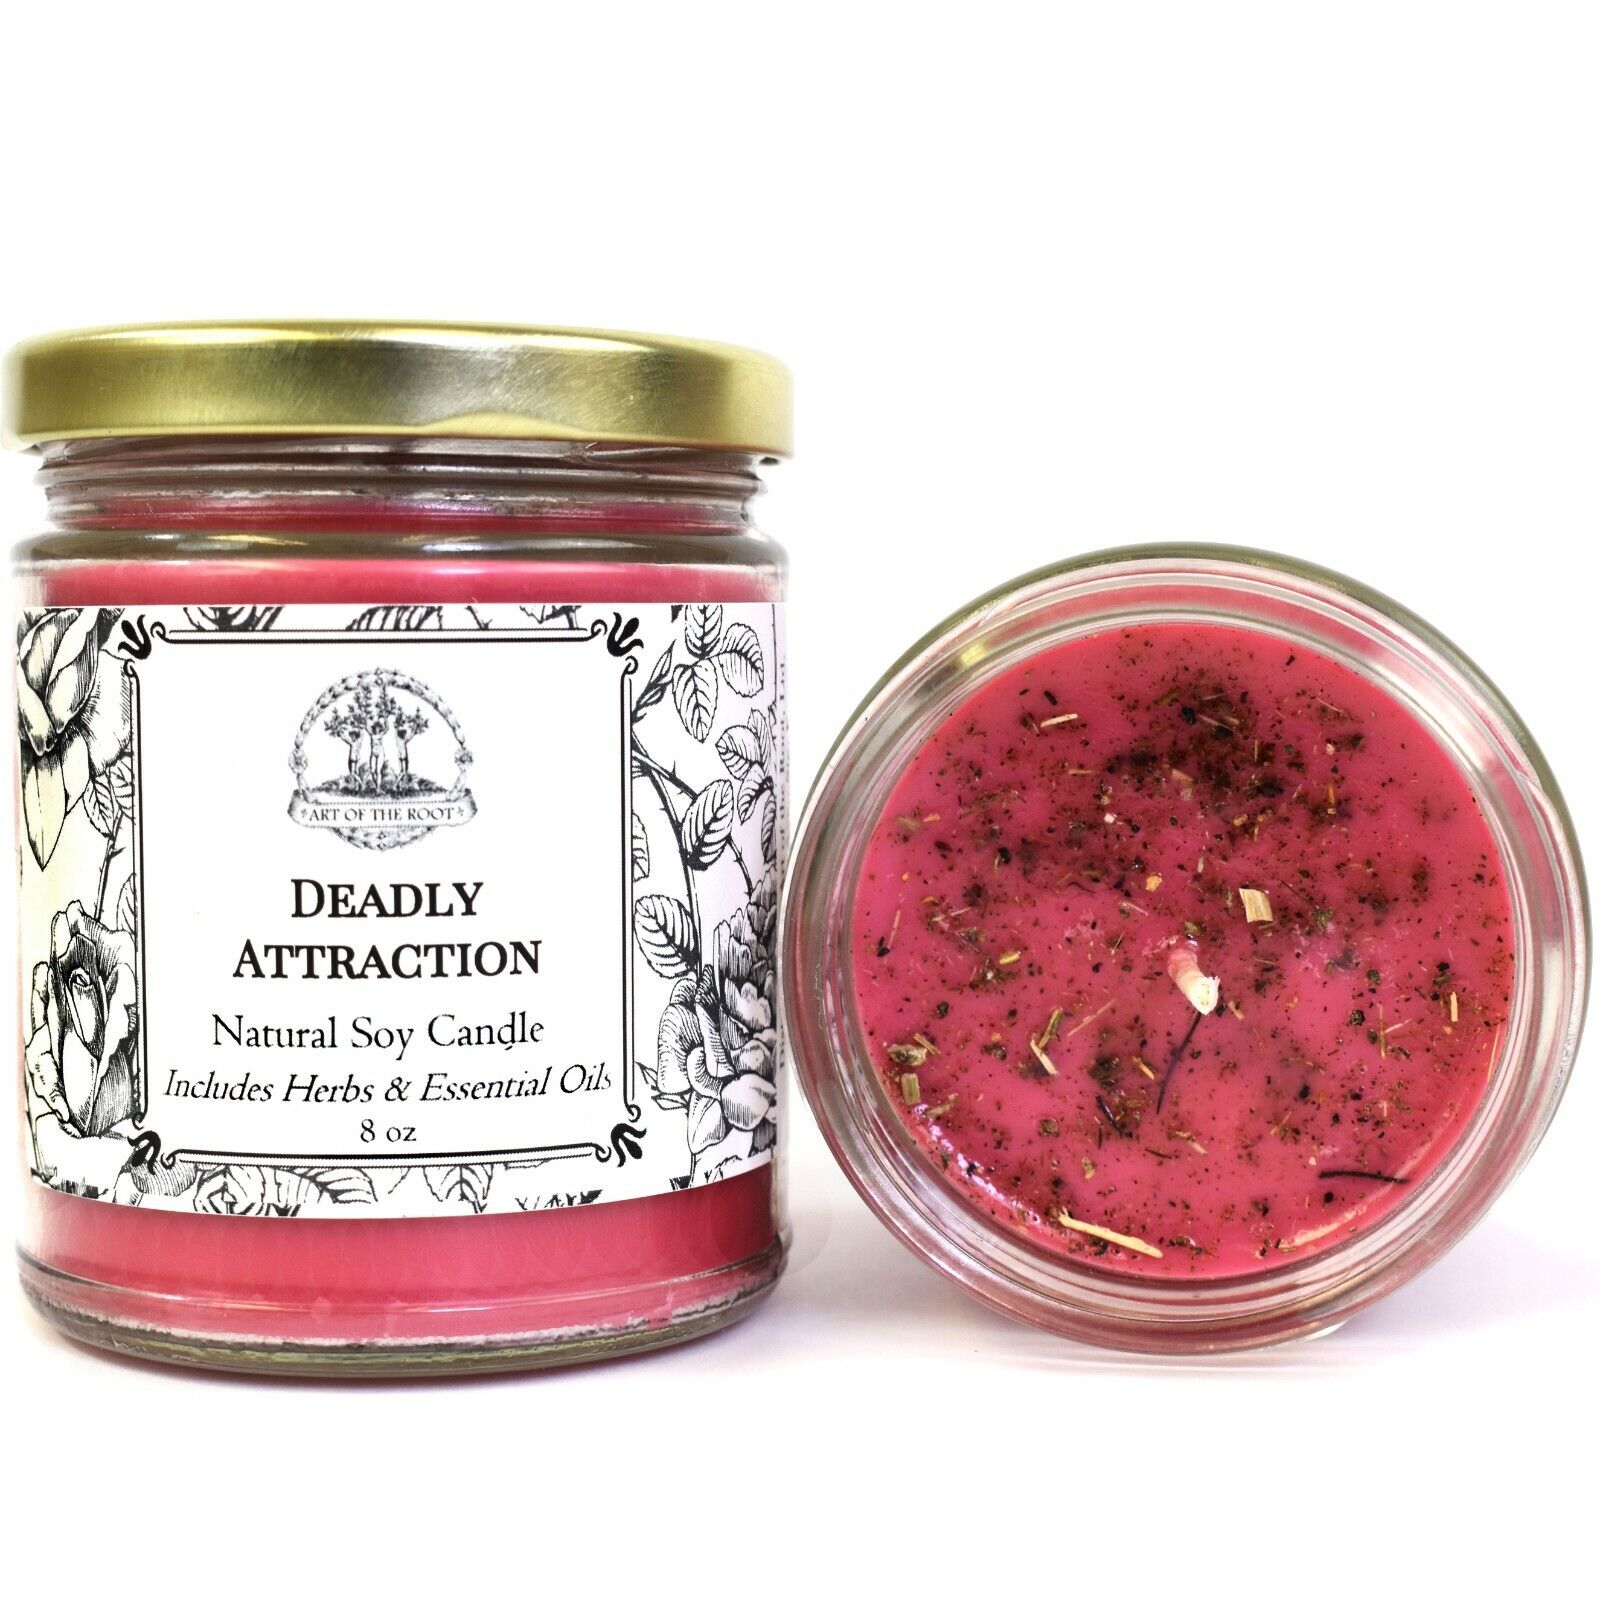 Deadly Attraction Soy Candle Seduction Passion Desire Love Wiccan Pagan Hoodoo